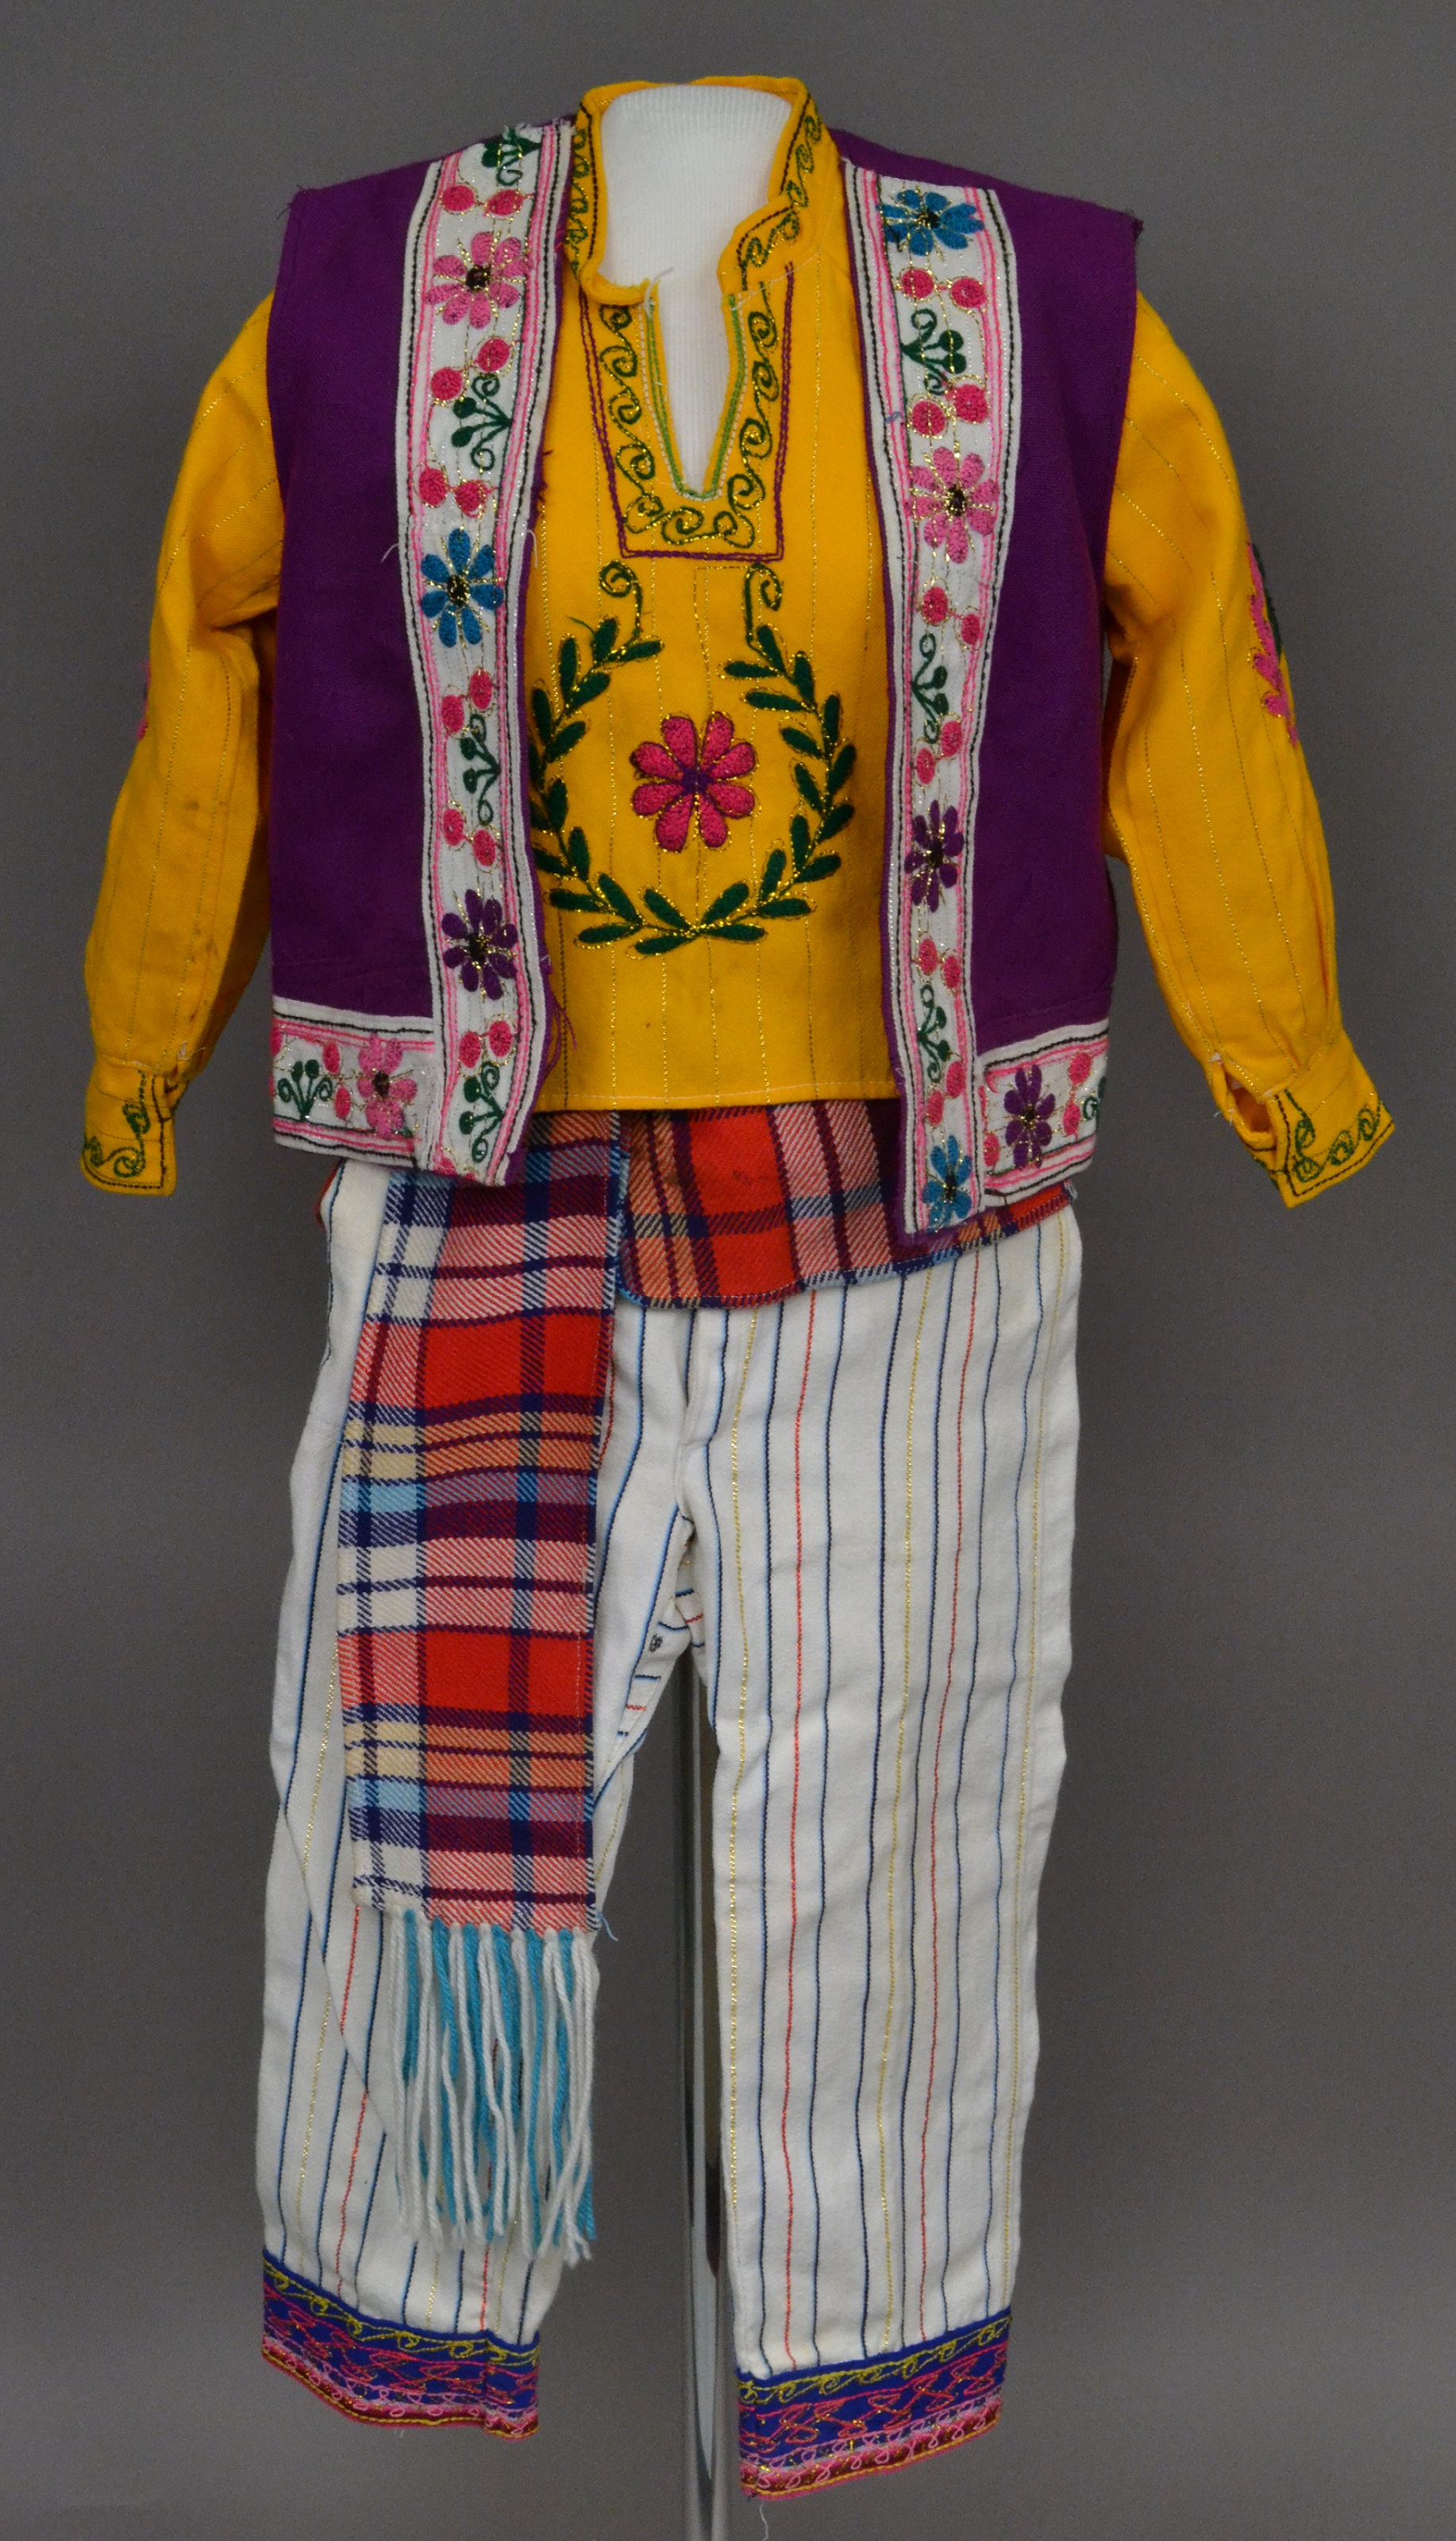 Clothing | Collections | Boston Children's Museum